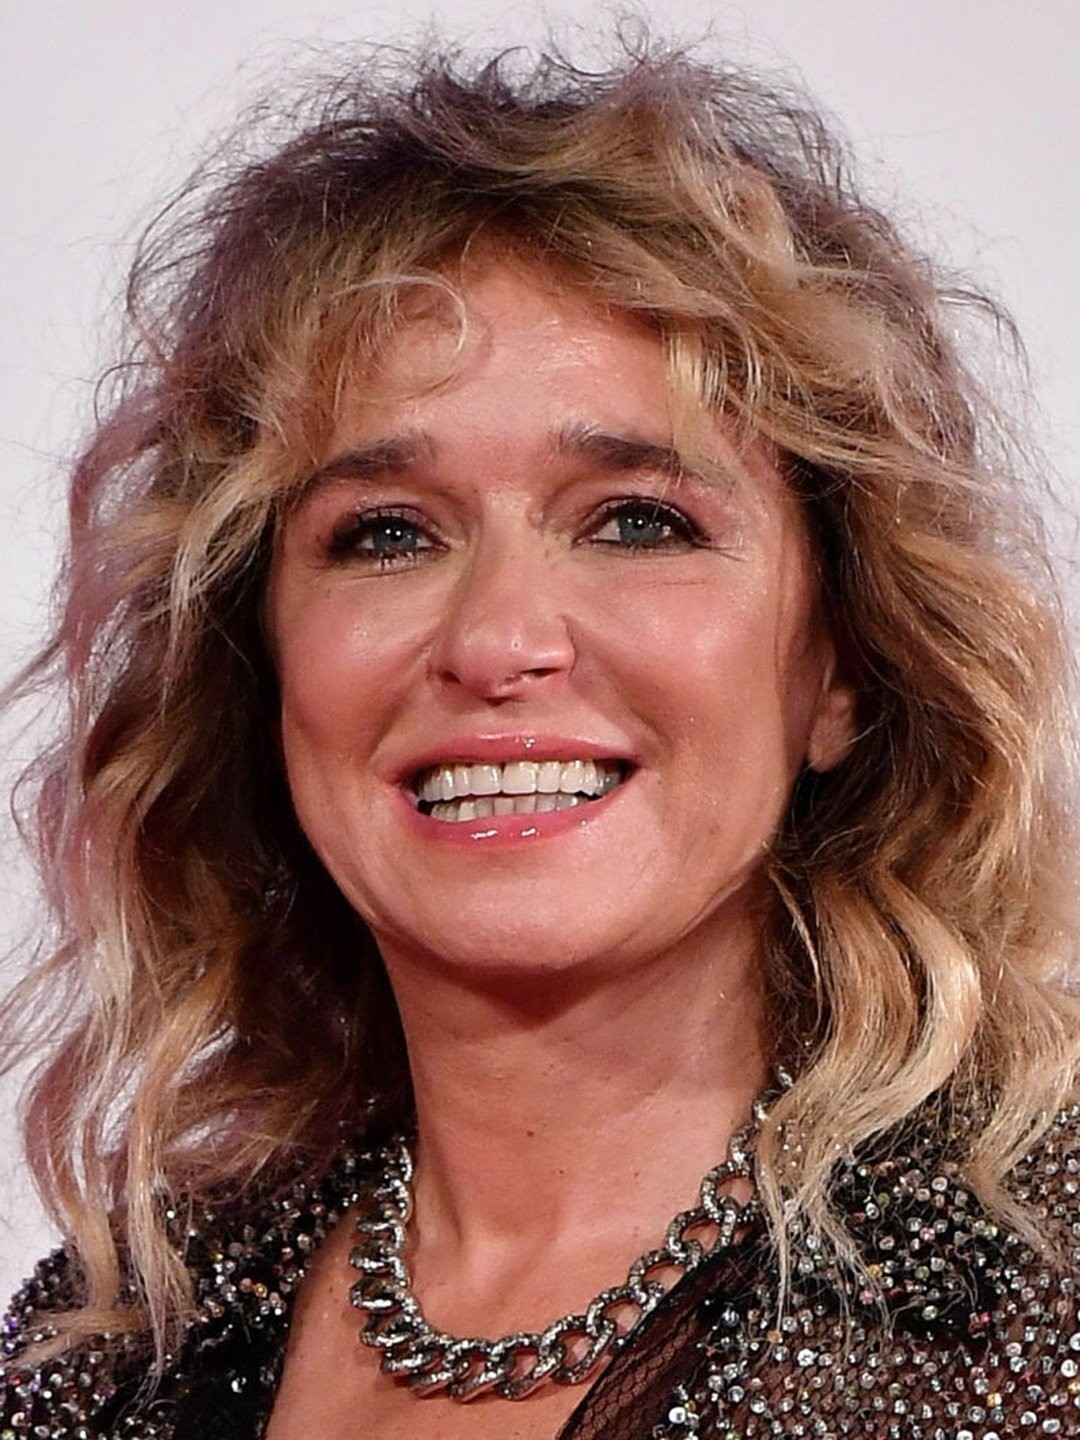 Valeria Golino Biography: Age, Net Worth, Parents, Instagram, Height, Wiki, Siblings, Spouse, Awards, Movies